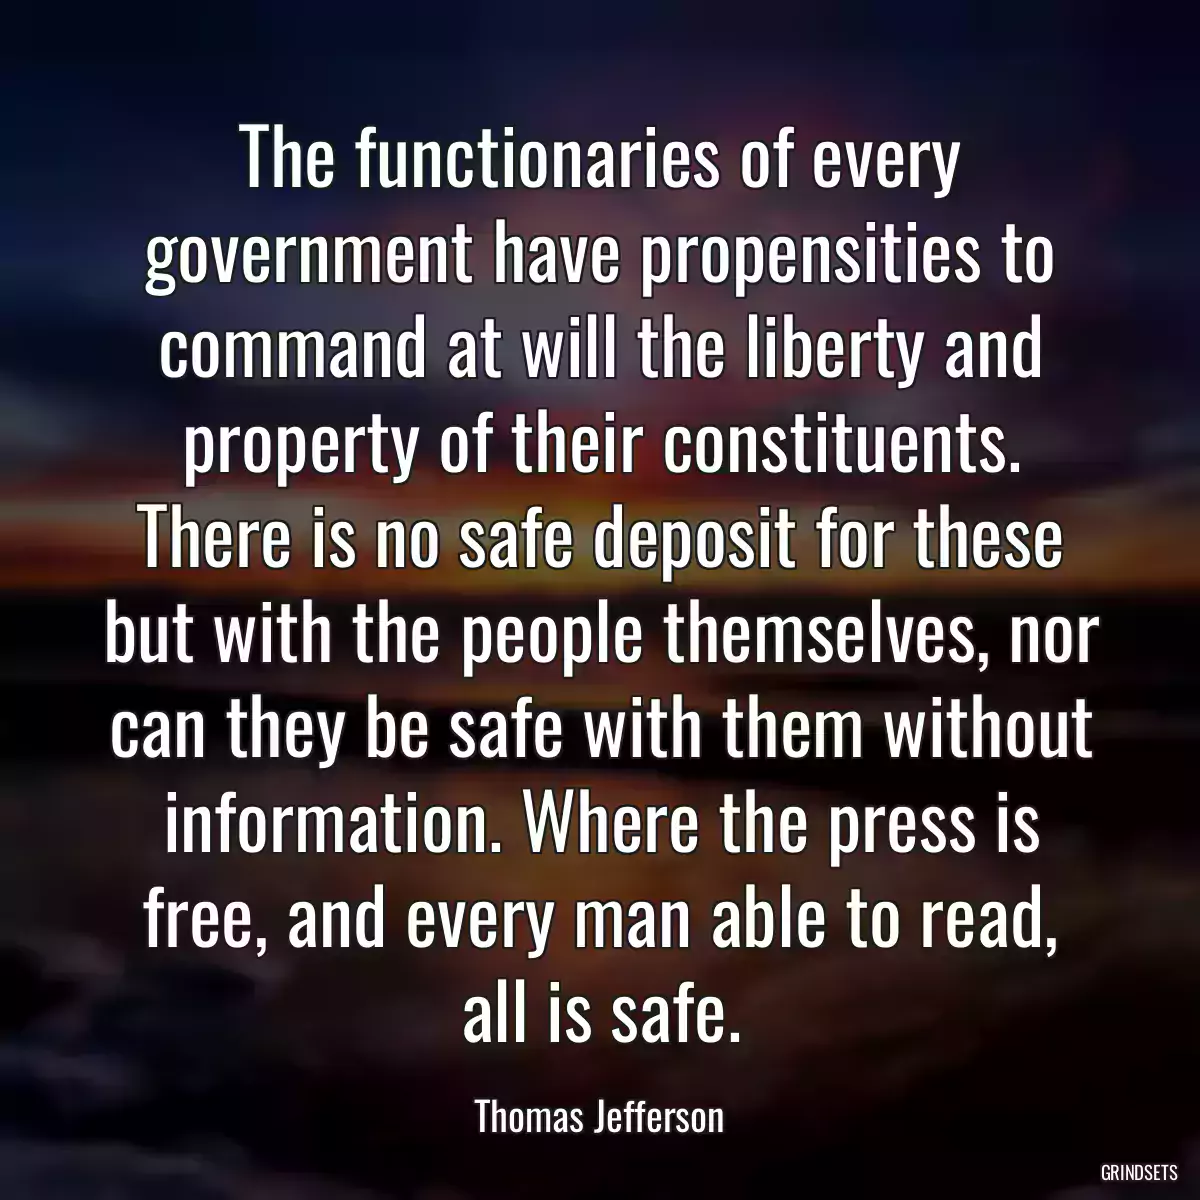 The functionaries of every government have propensities to command at will the liberty and property of their constituents. There is no safe deposit for these but with the people themselves, nor can they be safe with them without information. Where the press is free, and every man able to read, all is safe.